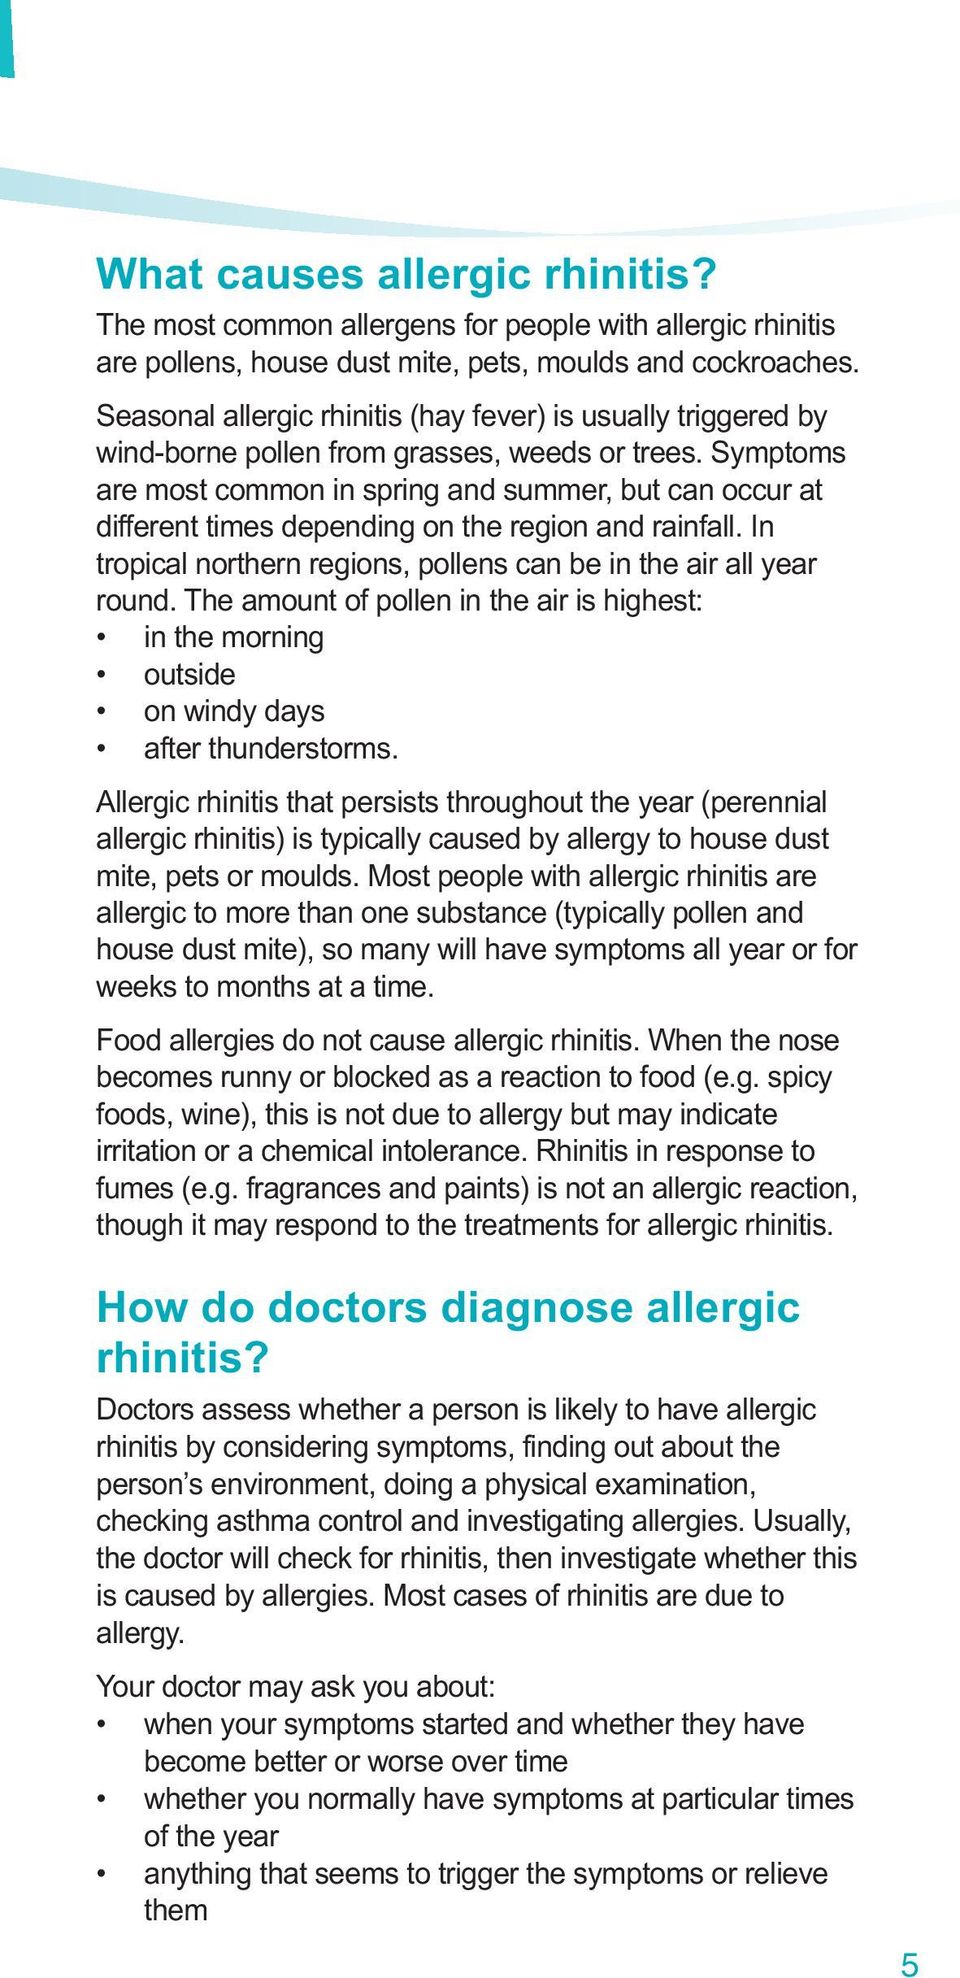 Symptoms are most common in spring and summer, but can occur at different times depending on the region and rainfall. In tropical northern regions, pollens can be in the air all year round.